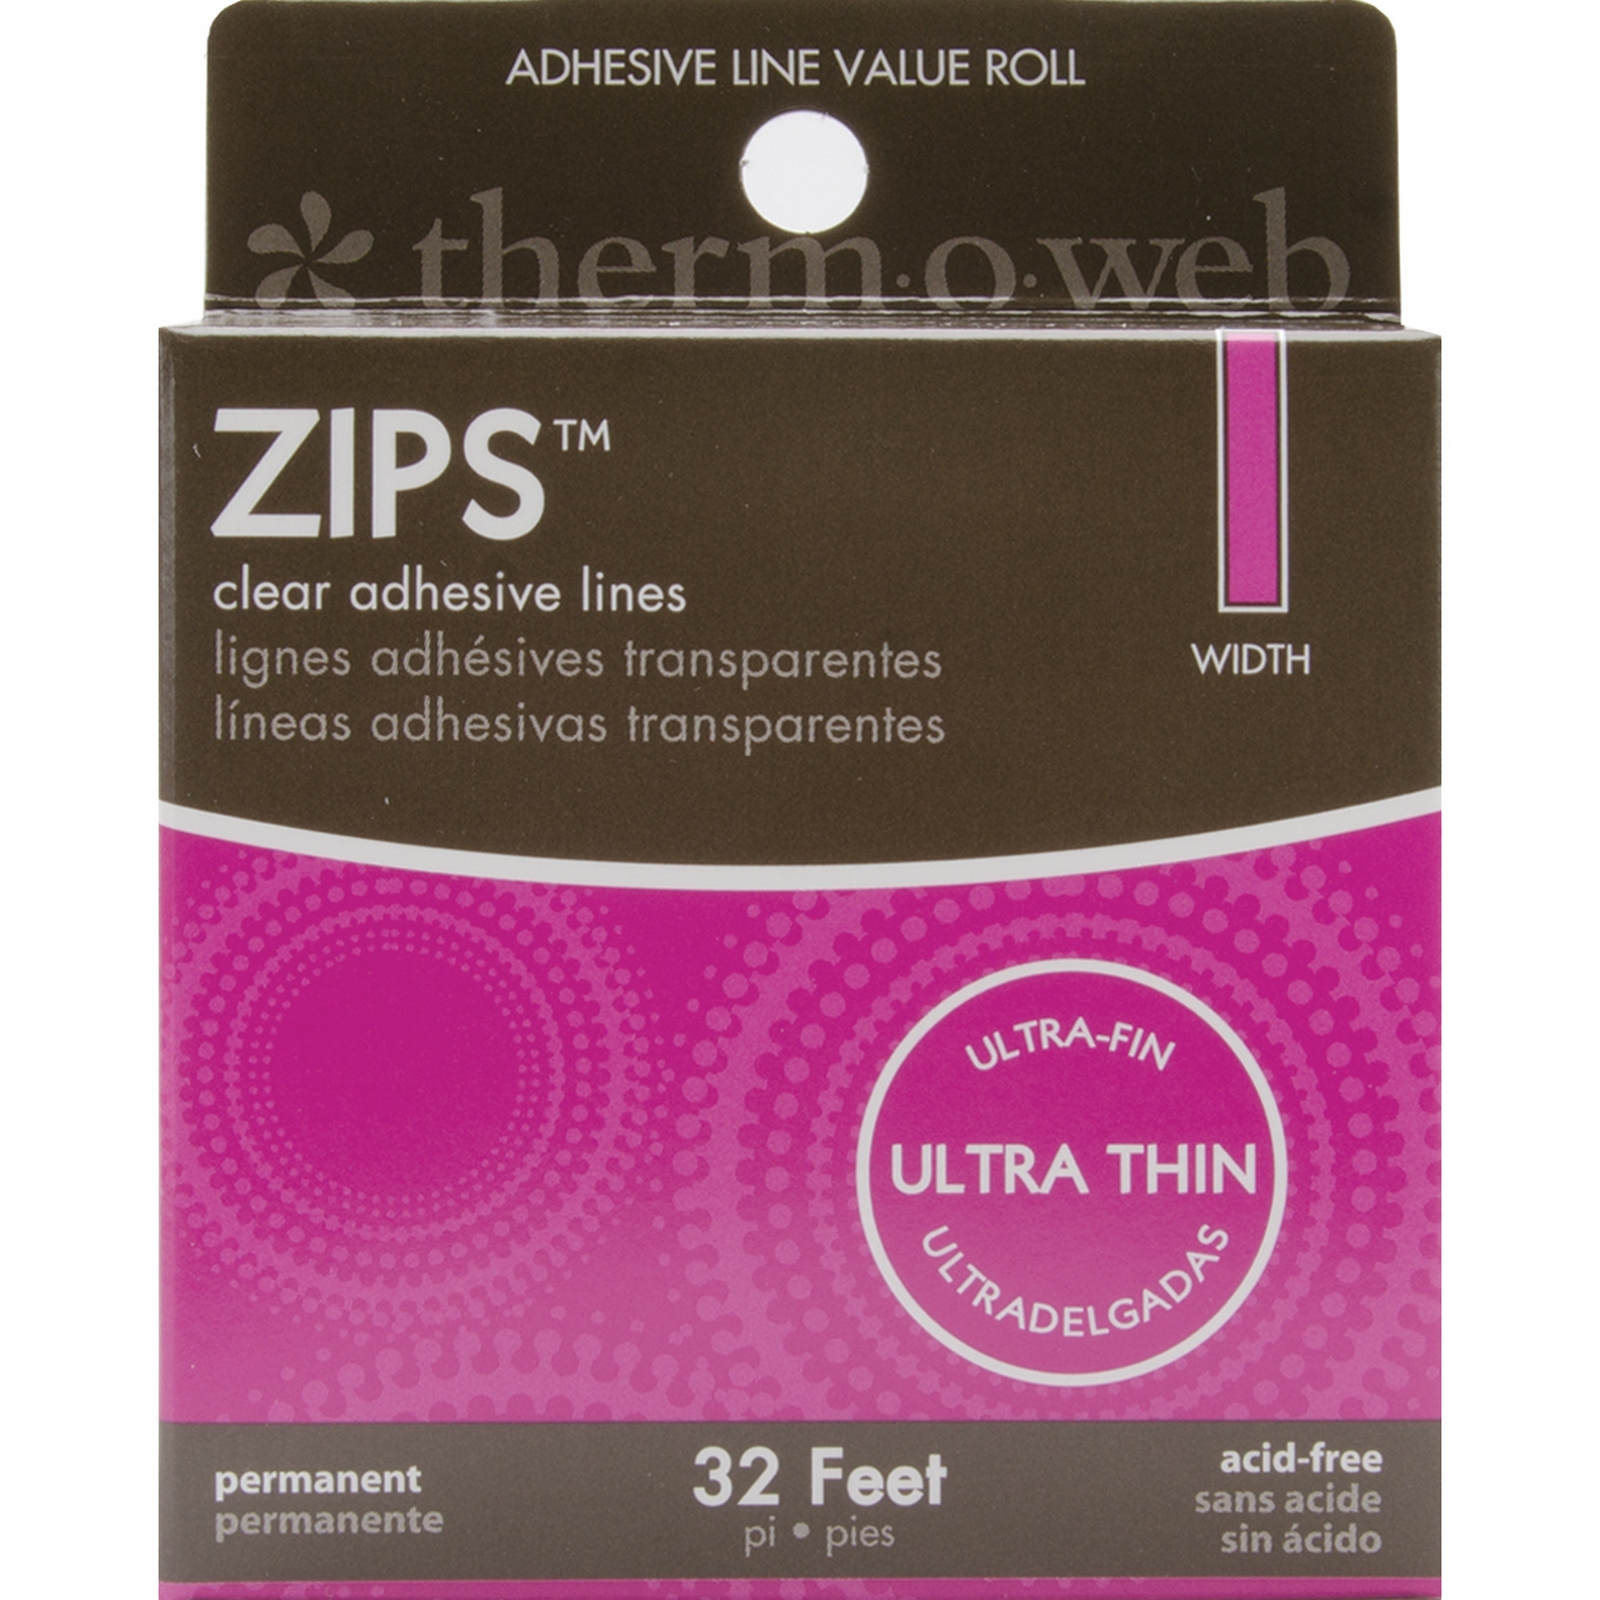 THERMOWEB Zips Clear Adhesive Lines-Memory 1/8"X1/64" Thick 32 Feet